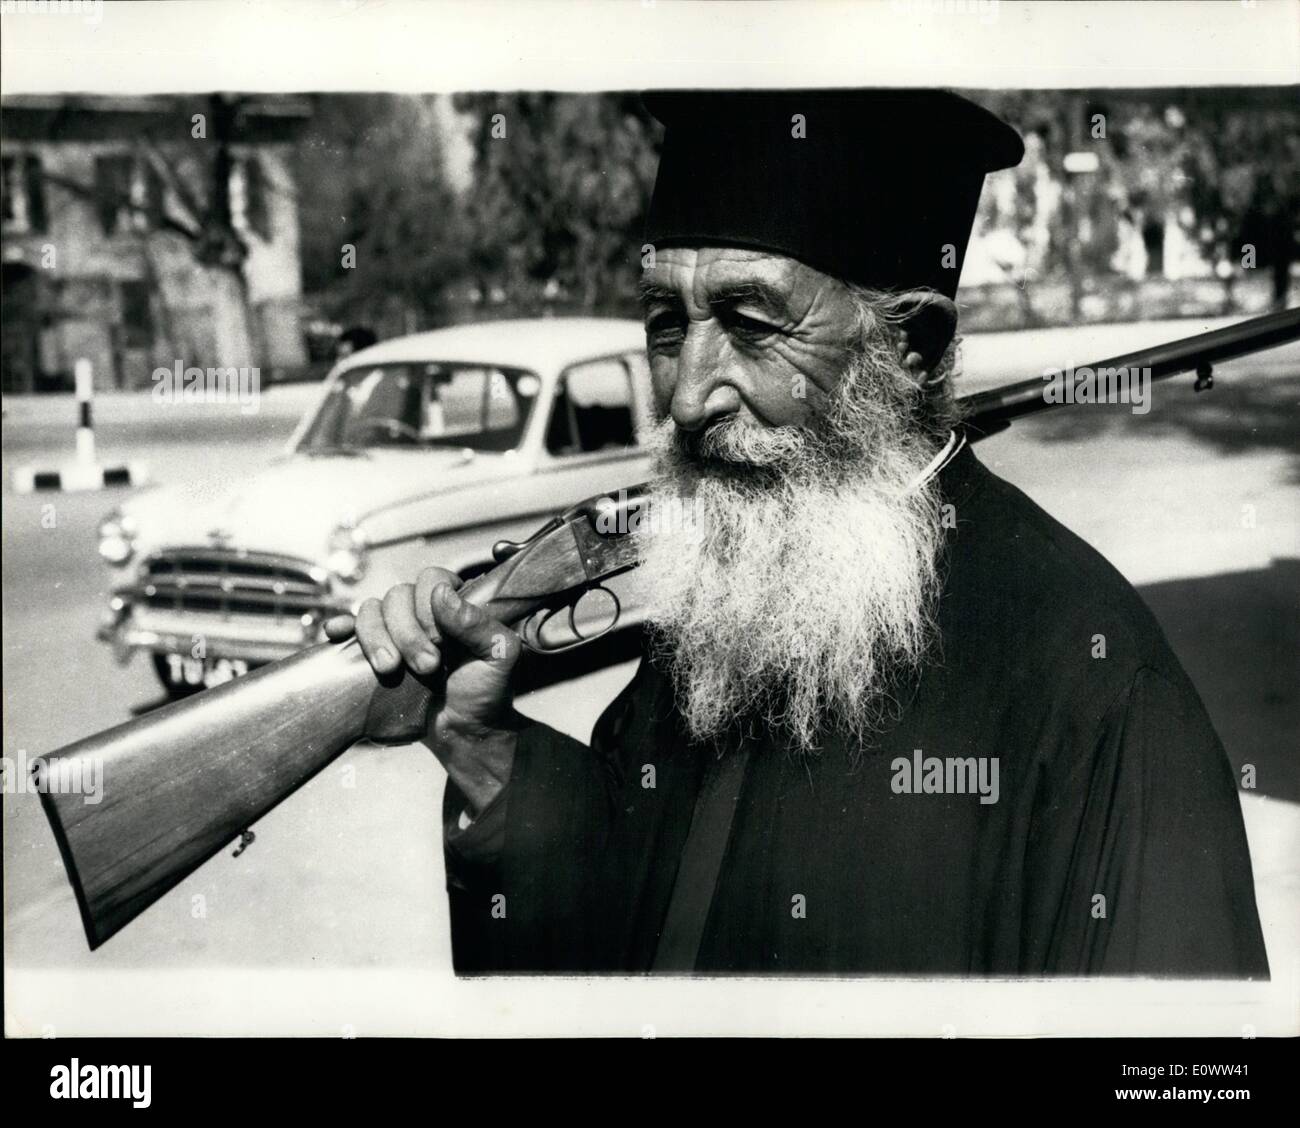 Mar. 03, 1964 - Greek Orthodox Priest - member of the ''Home Guard'' - In Nicosia: Photo shows a member of the Greek Orthodox Priesthood - complete with his rifle - seen in the streets of Nicosia. He says he is a member of the ''Home Guard'' - formed during the present tension on the island. Stock Photo